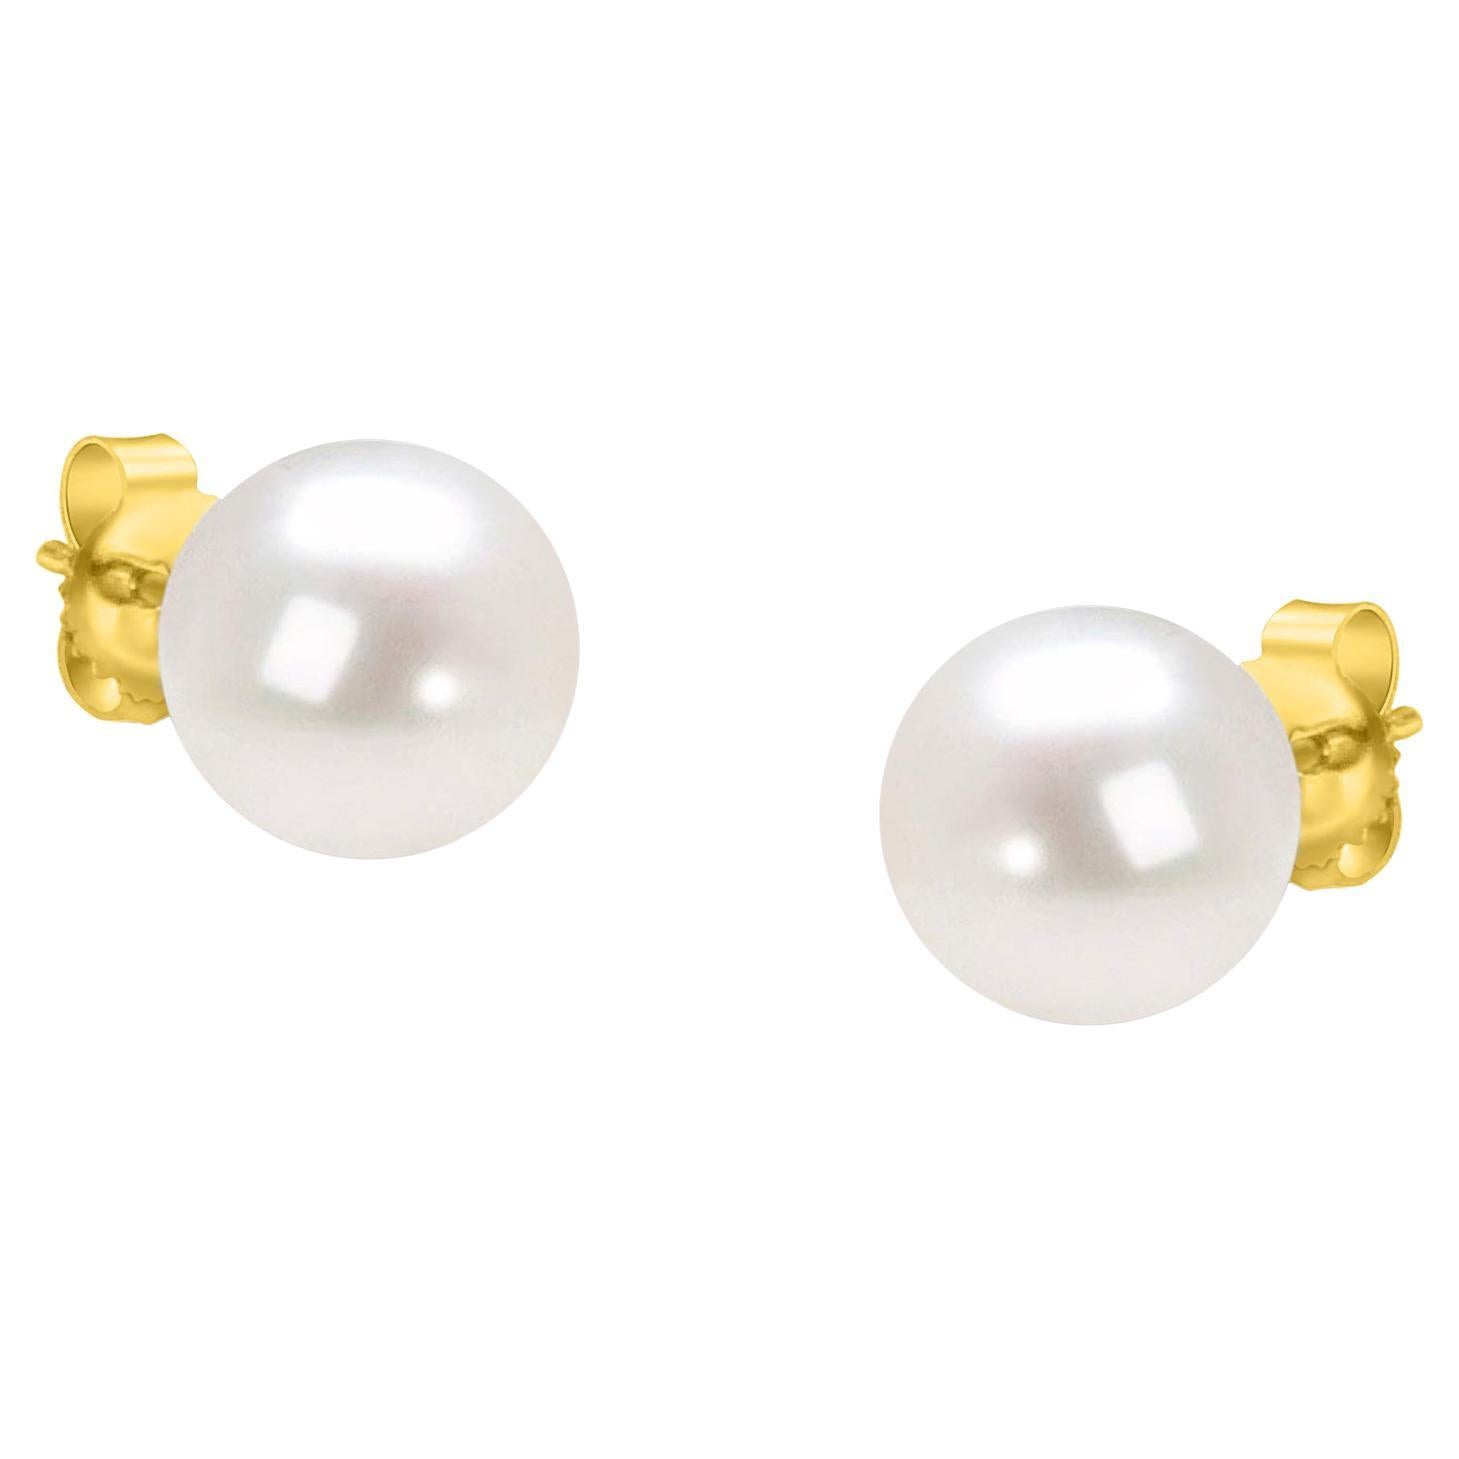 14K Yellow Gold Round Freshwater Akoya Cultured AAA+ Quality Pearl Stud Earrings